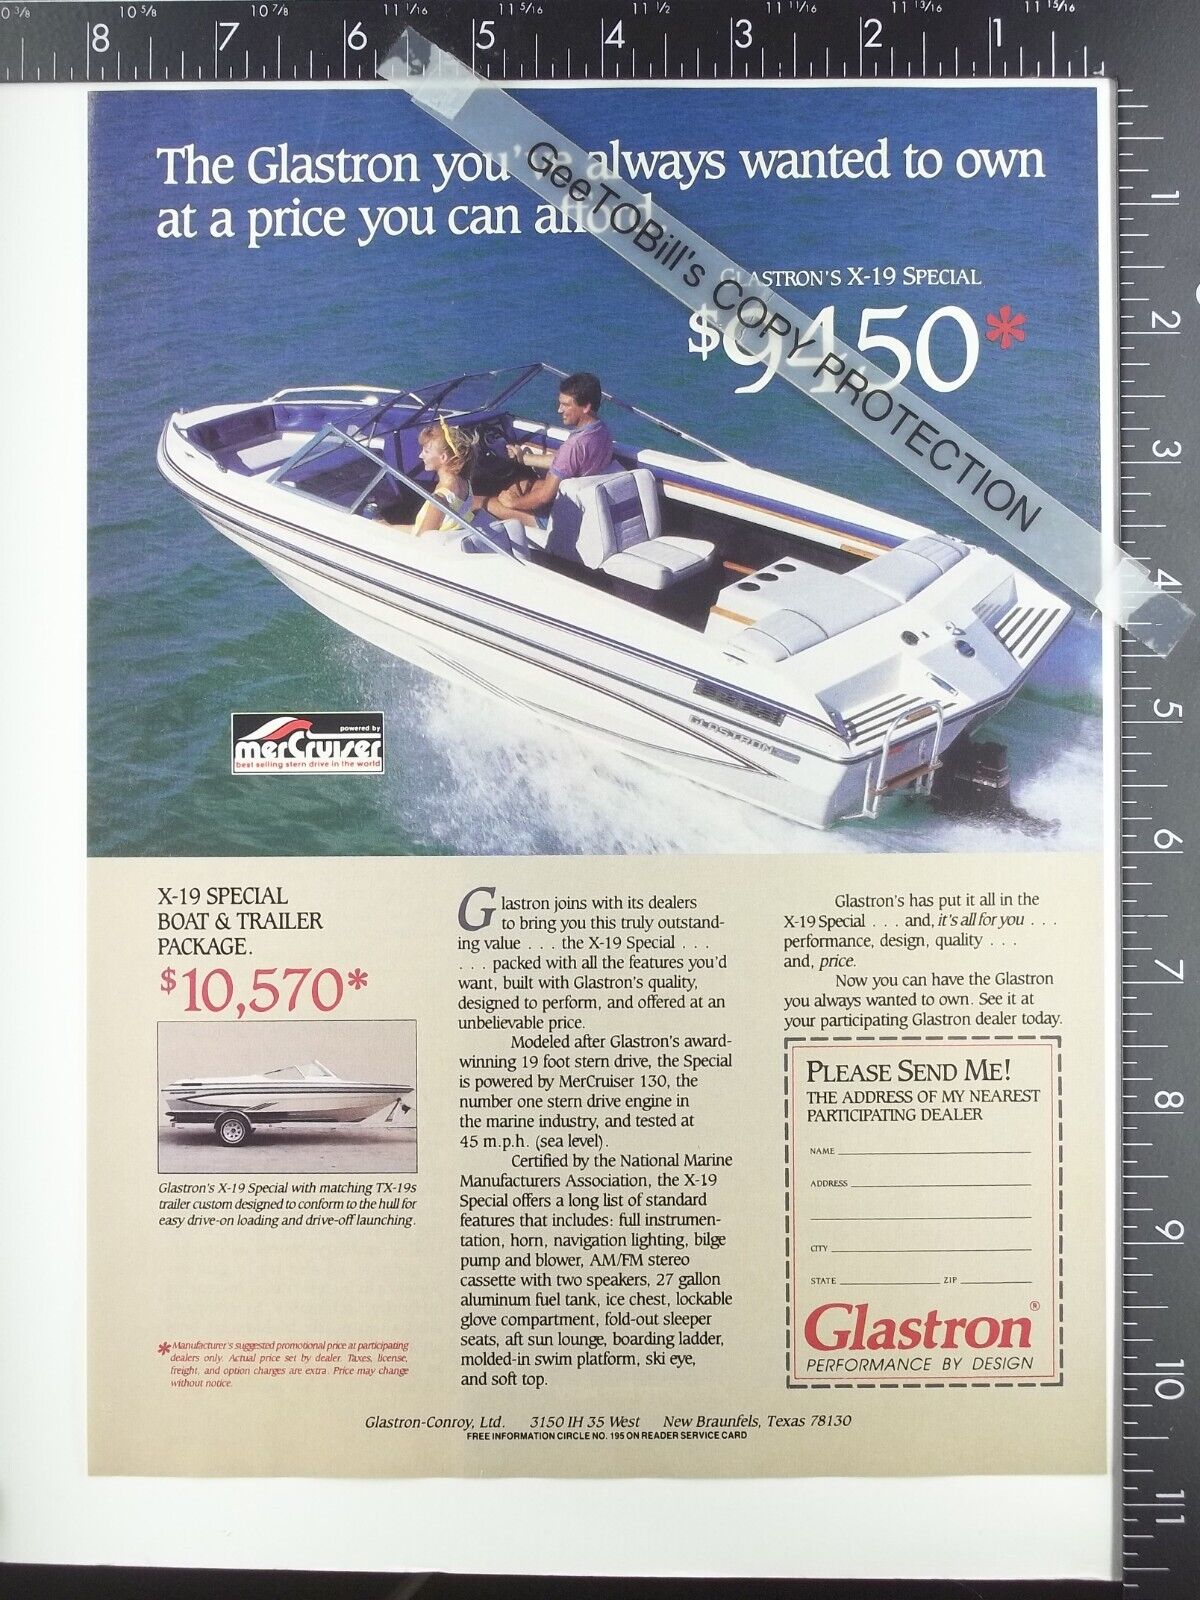 1987 ADVERTISING for Glastron X-19 boat ADVERTISEMENT